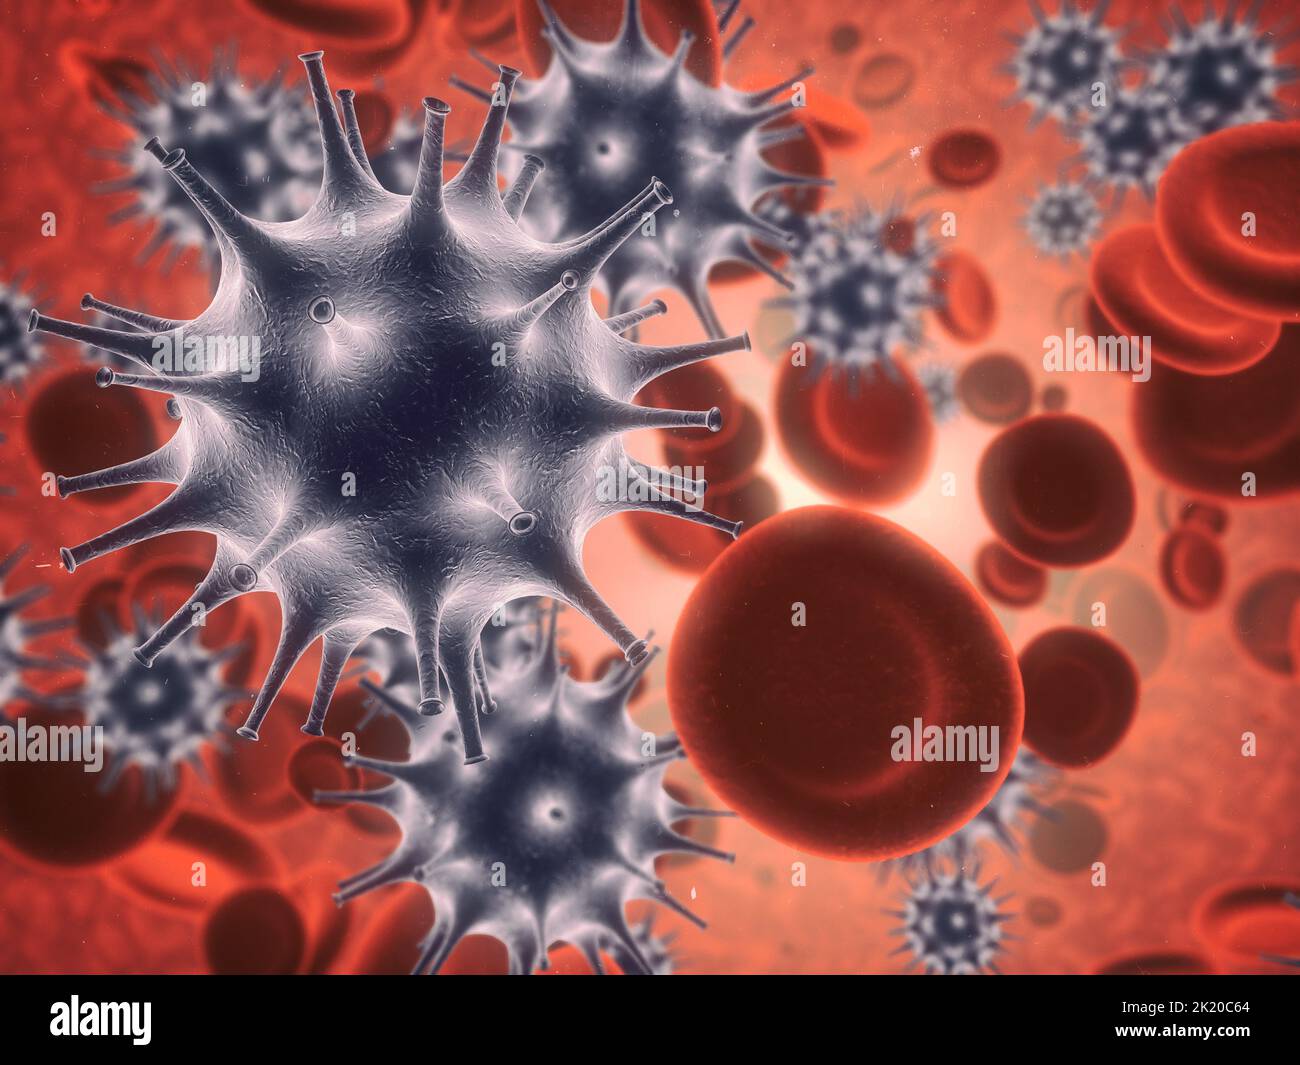 Spreading disease. Microscopic view of a virus attacking healthy cells in the human body. Stock Photo